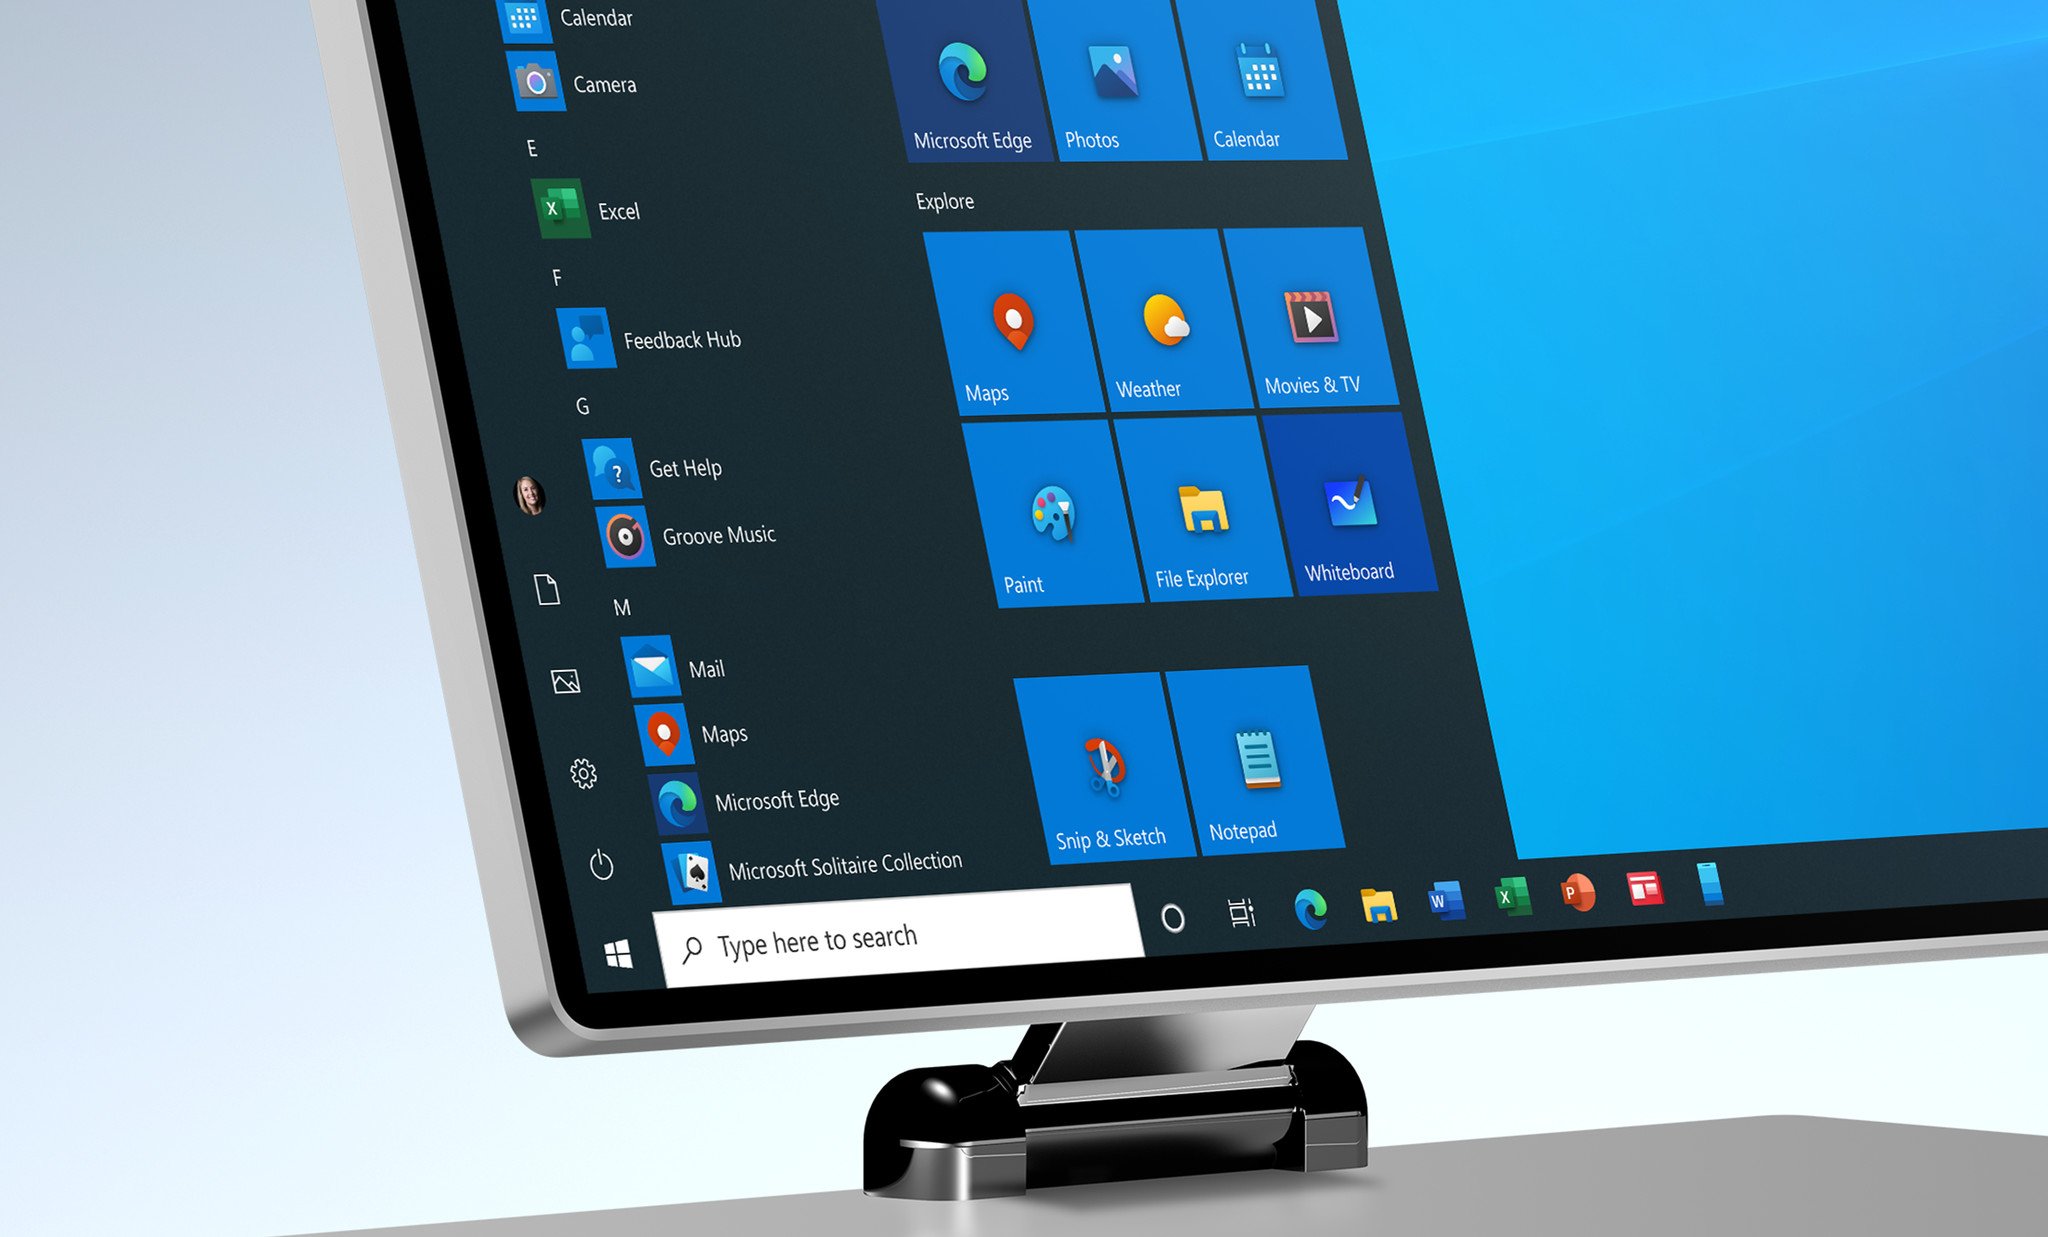 Windows 10 is getting an overdue (and weird) makeover